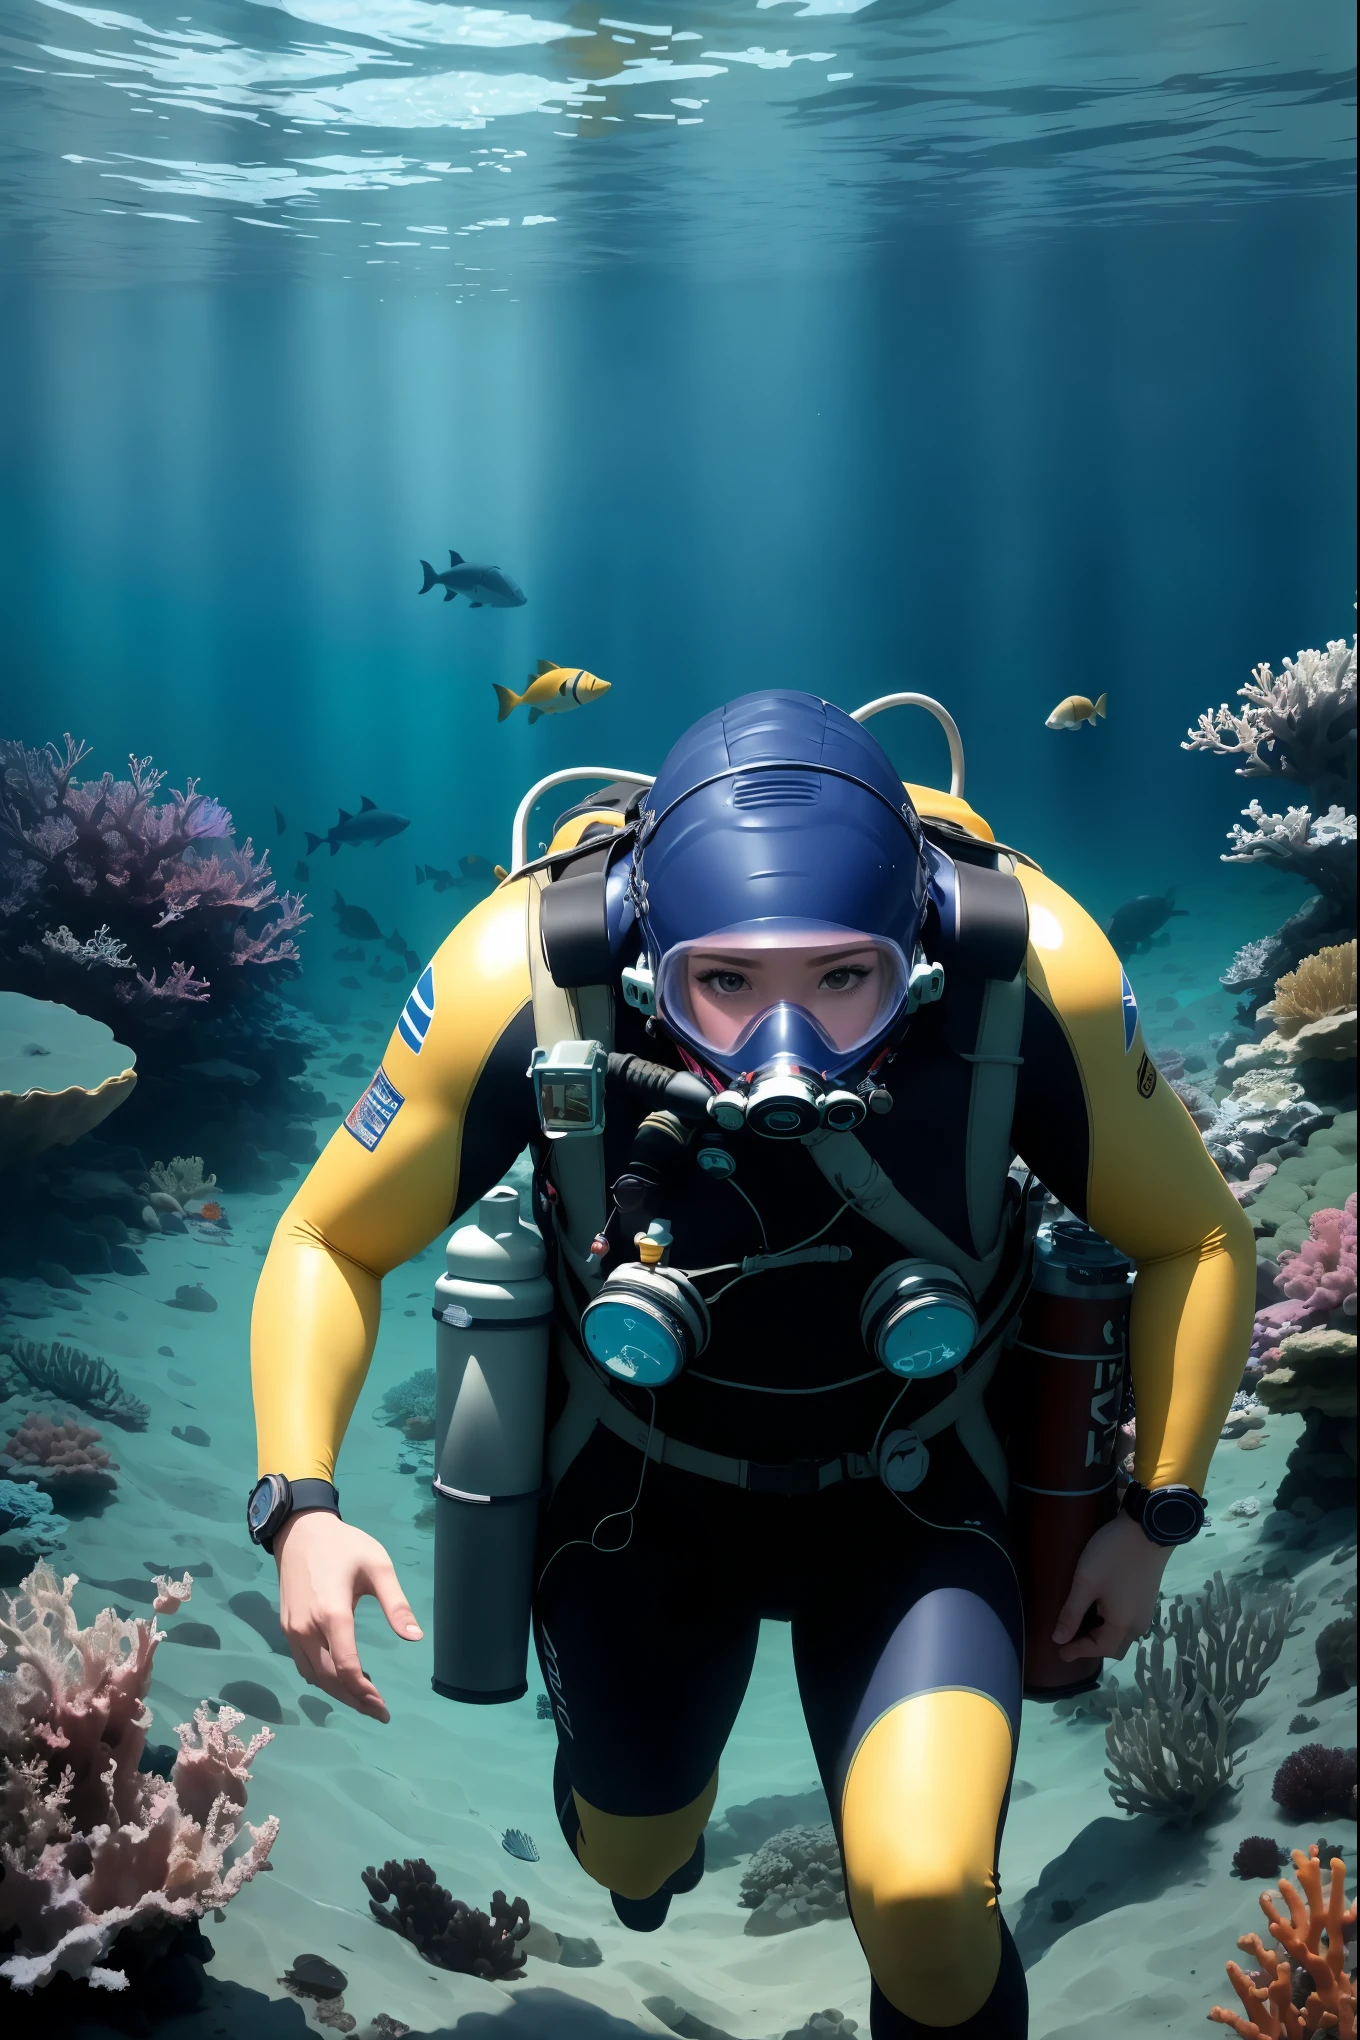 a professional diver exploring underwater, wearing a diving suit and carrying diving equipment, surrounded by colorful coral and marine life
Stable Diffusion: (best quality,4k,8k,highres,masterpiece:1.2),ultra-detailed,(realistic,photorealistic,photo-realistic:1.37),underwater photography,stunning marine,professional diver,diving suit,diving gear,colorful coral,marine life,vivid colors,underwater exploration,clear water,marine environment,aquatic adventure